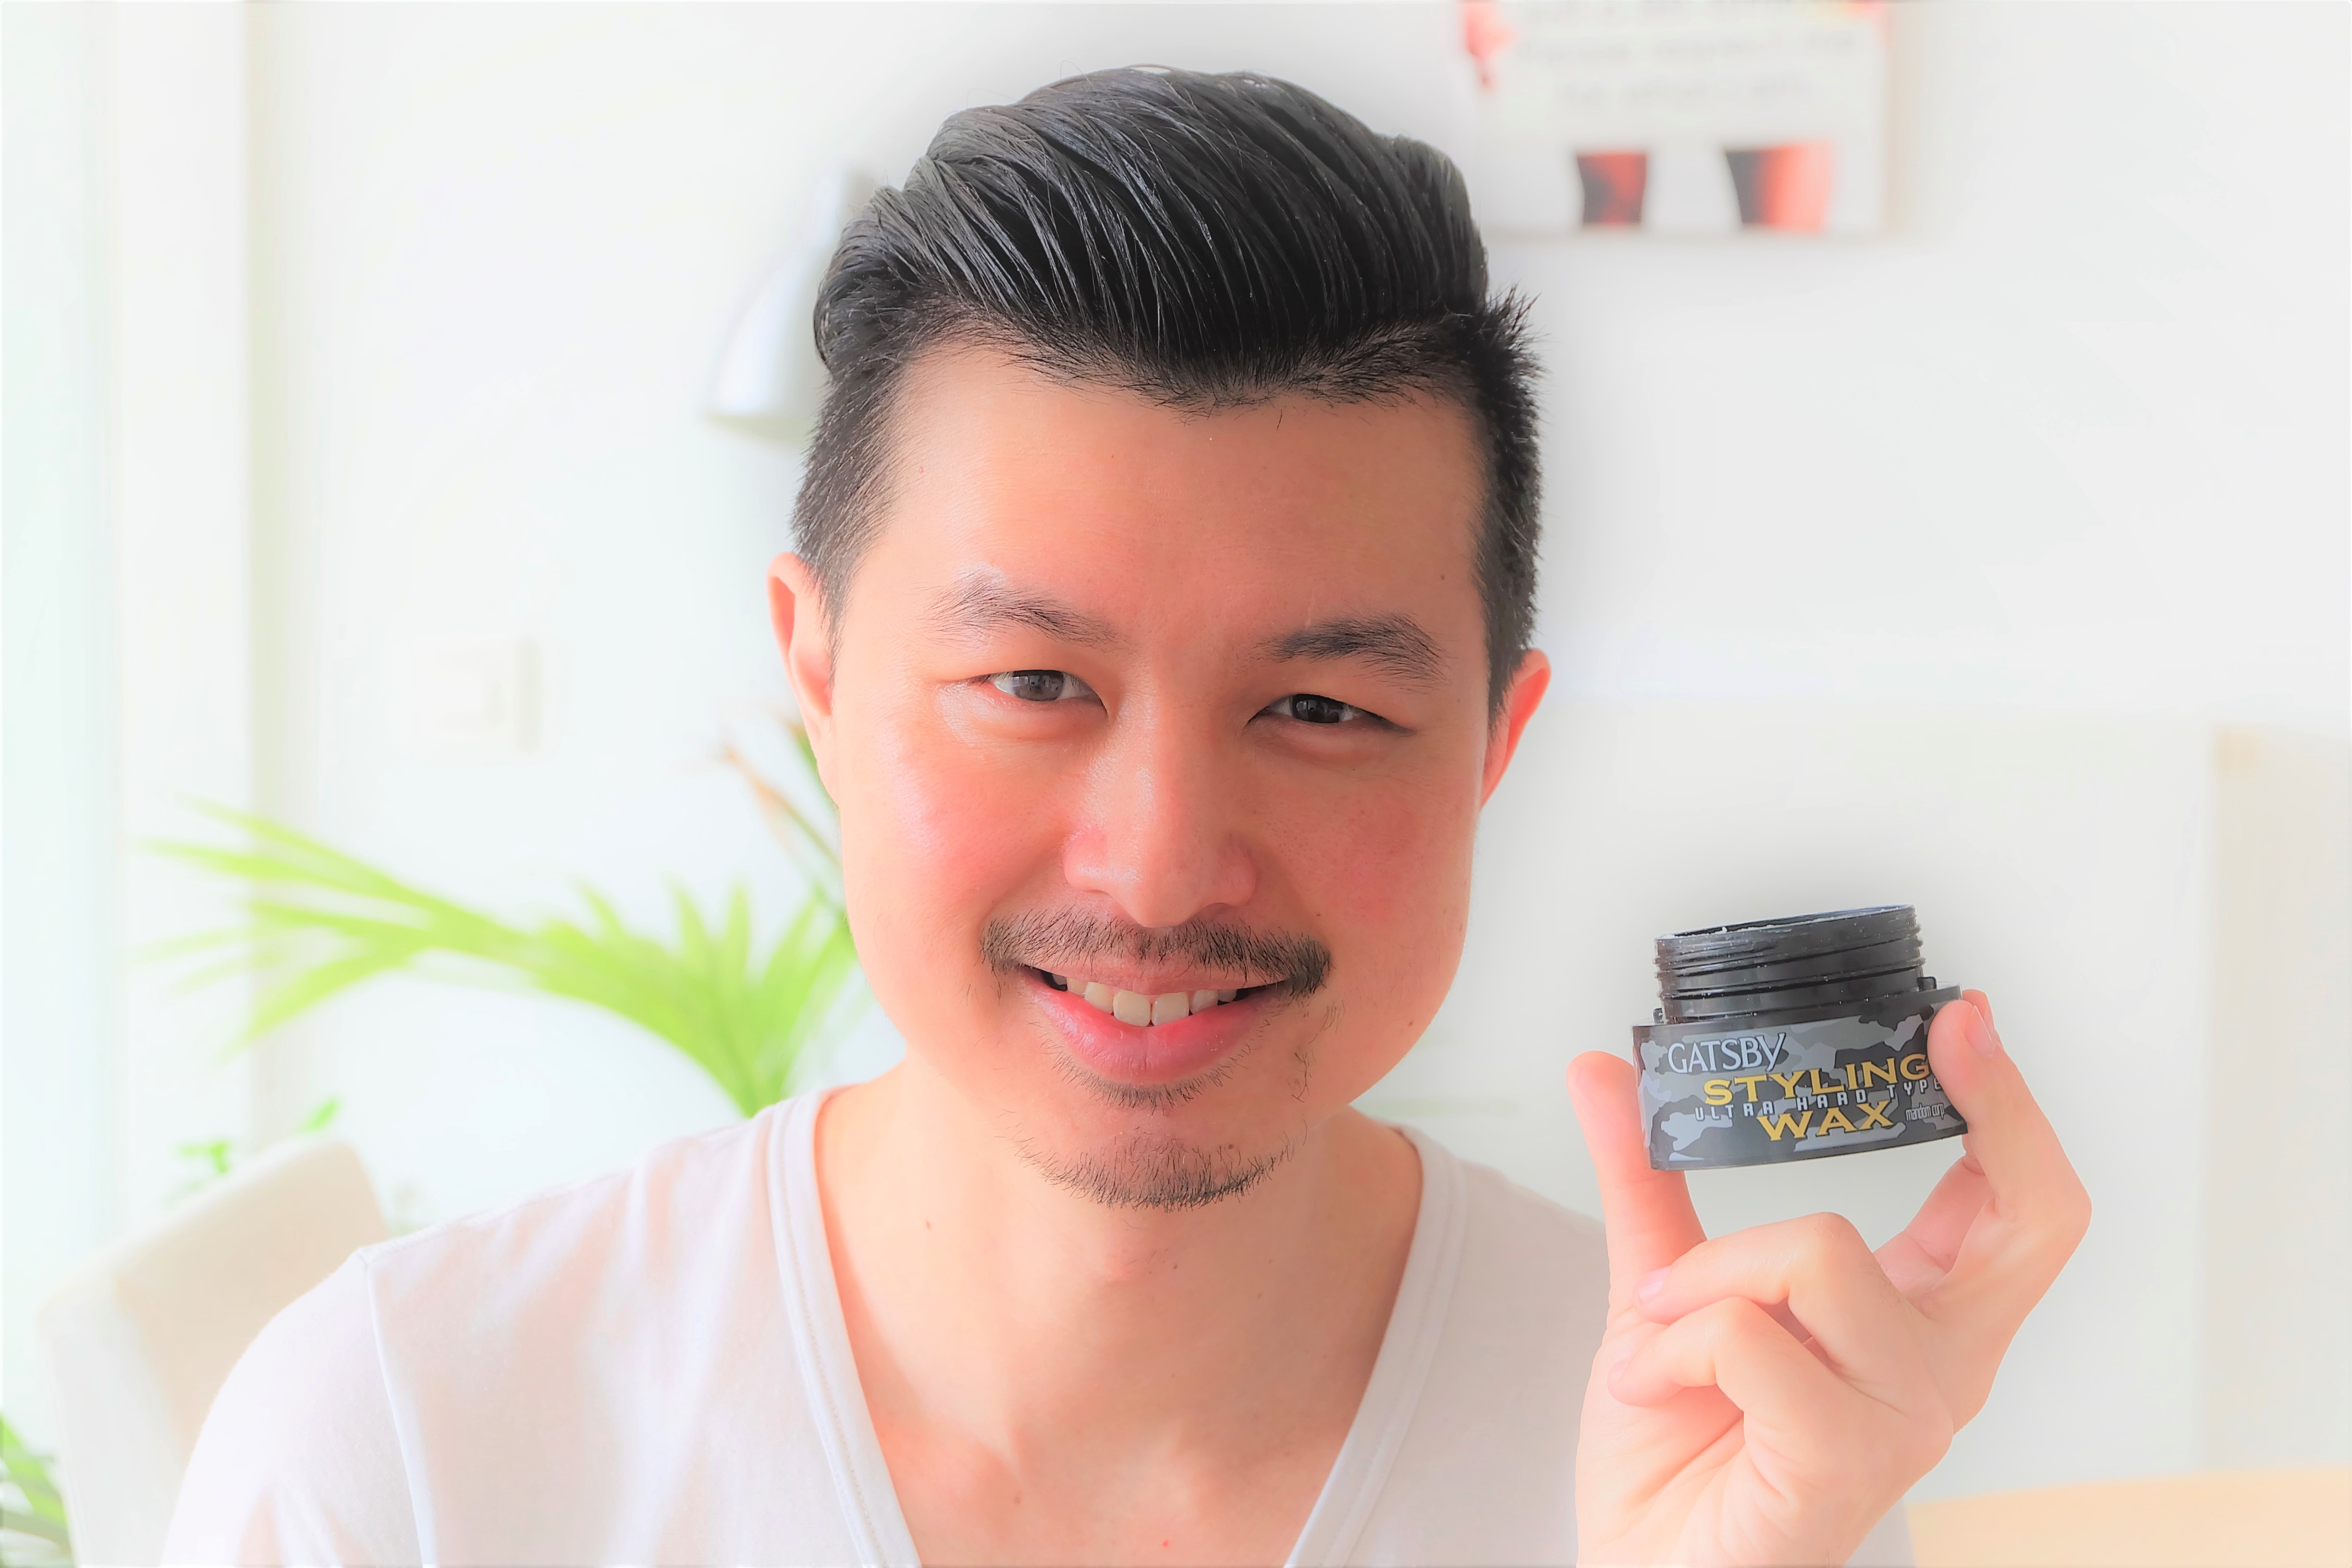 The Holy Grail for Male Asian Hair: Gatsby Ultra Hard Type Styling Hair Wax  or Gatsby Pompadour Styling Hair Pomade Supreme Hold – CARRY IT LIKE HARRY